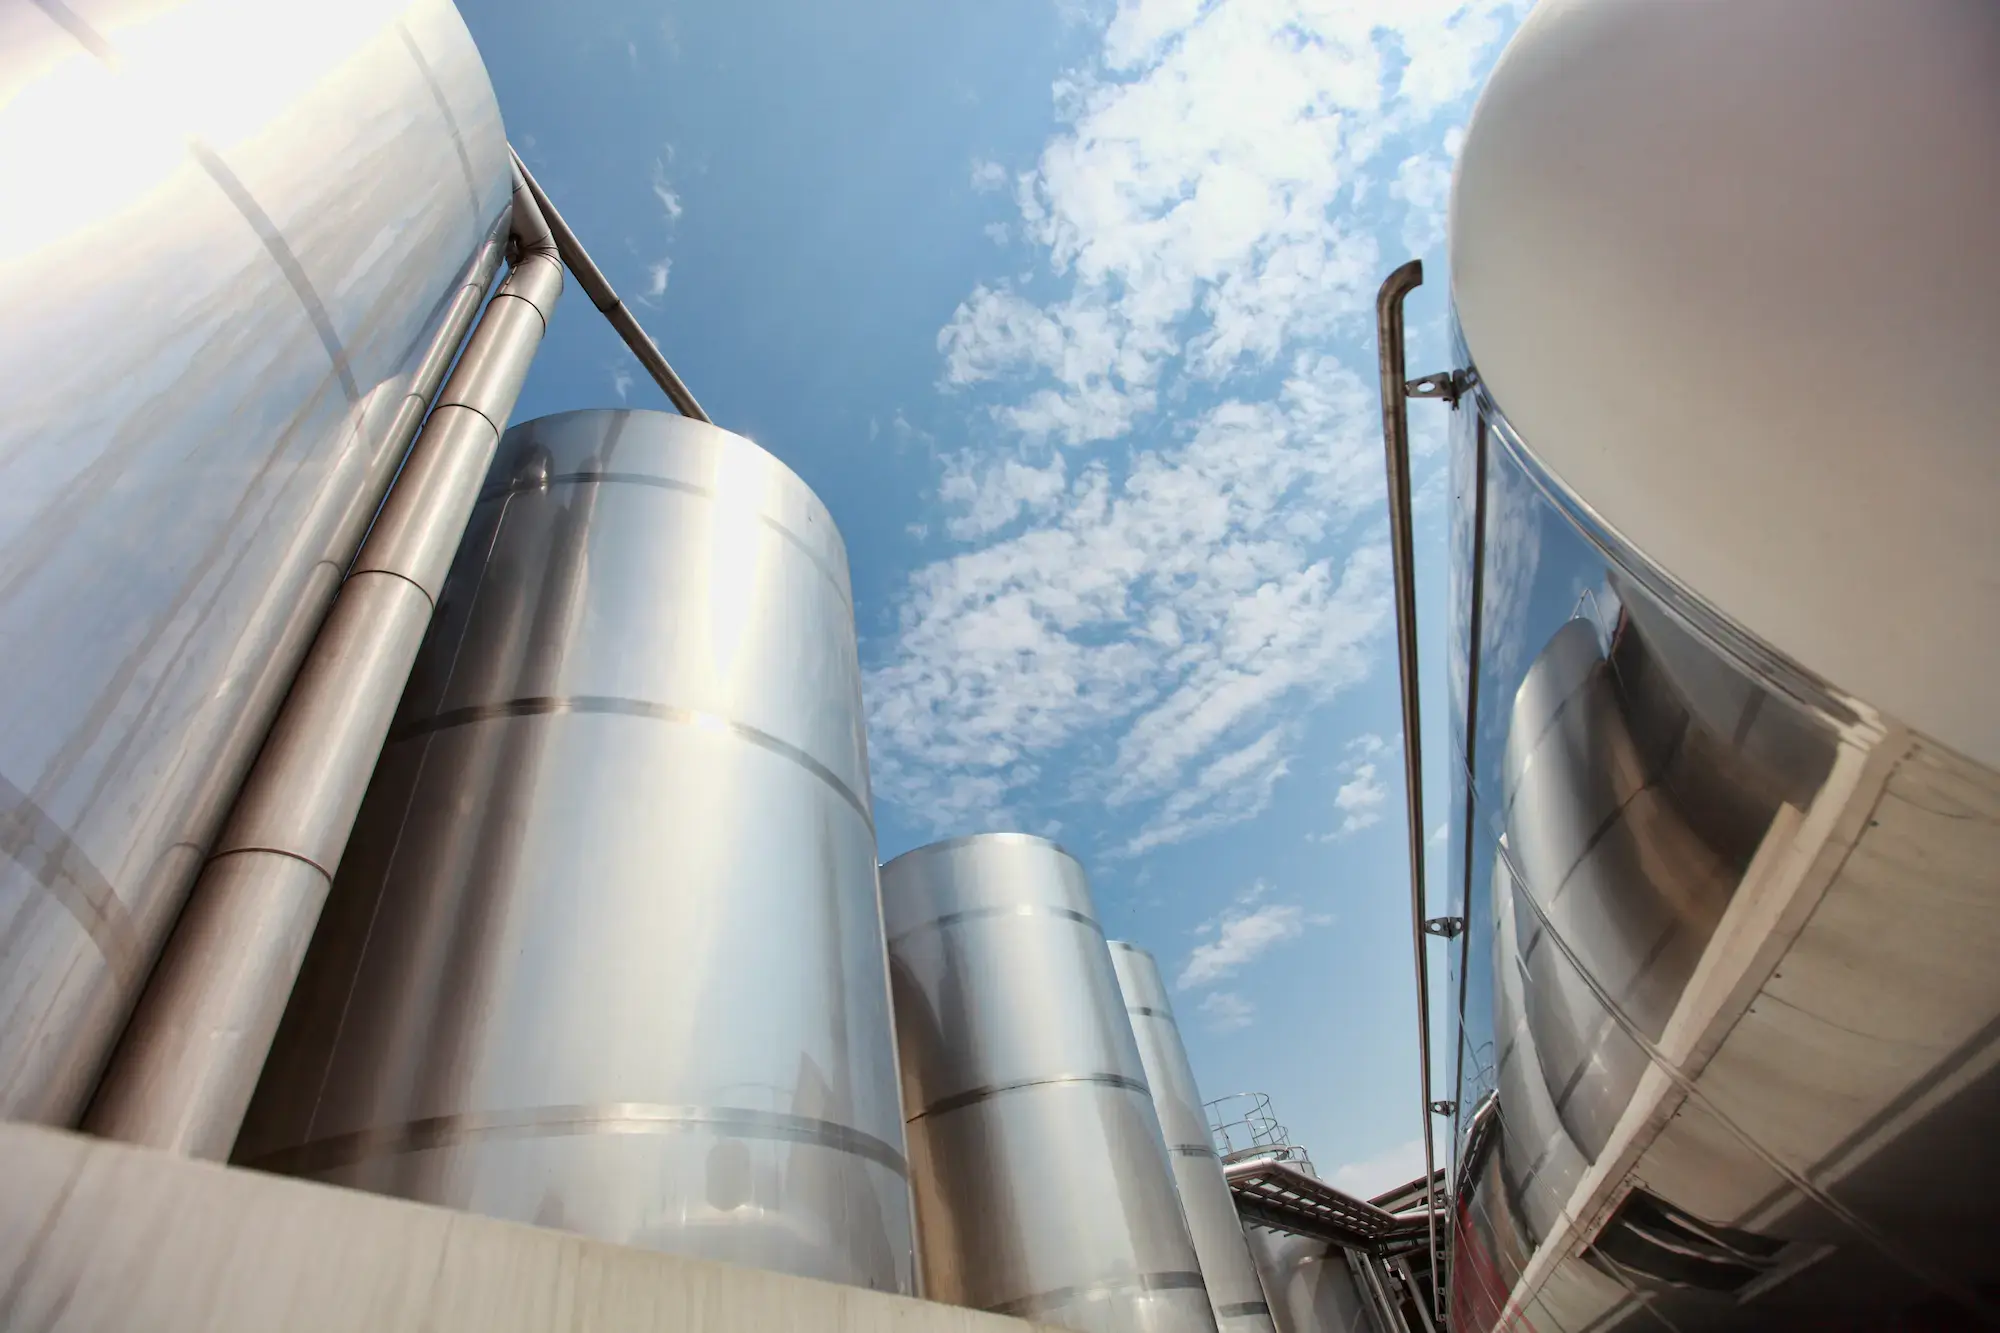 Types of Stainless Steel Tanks